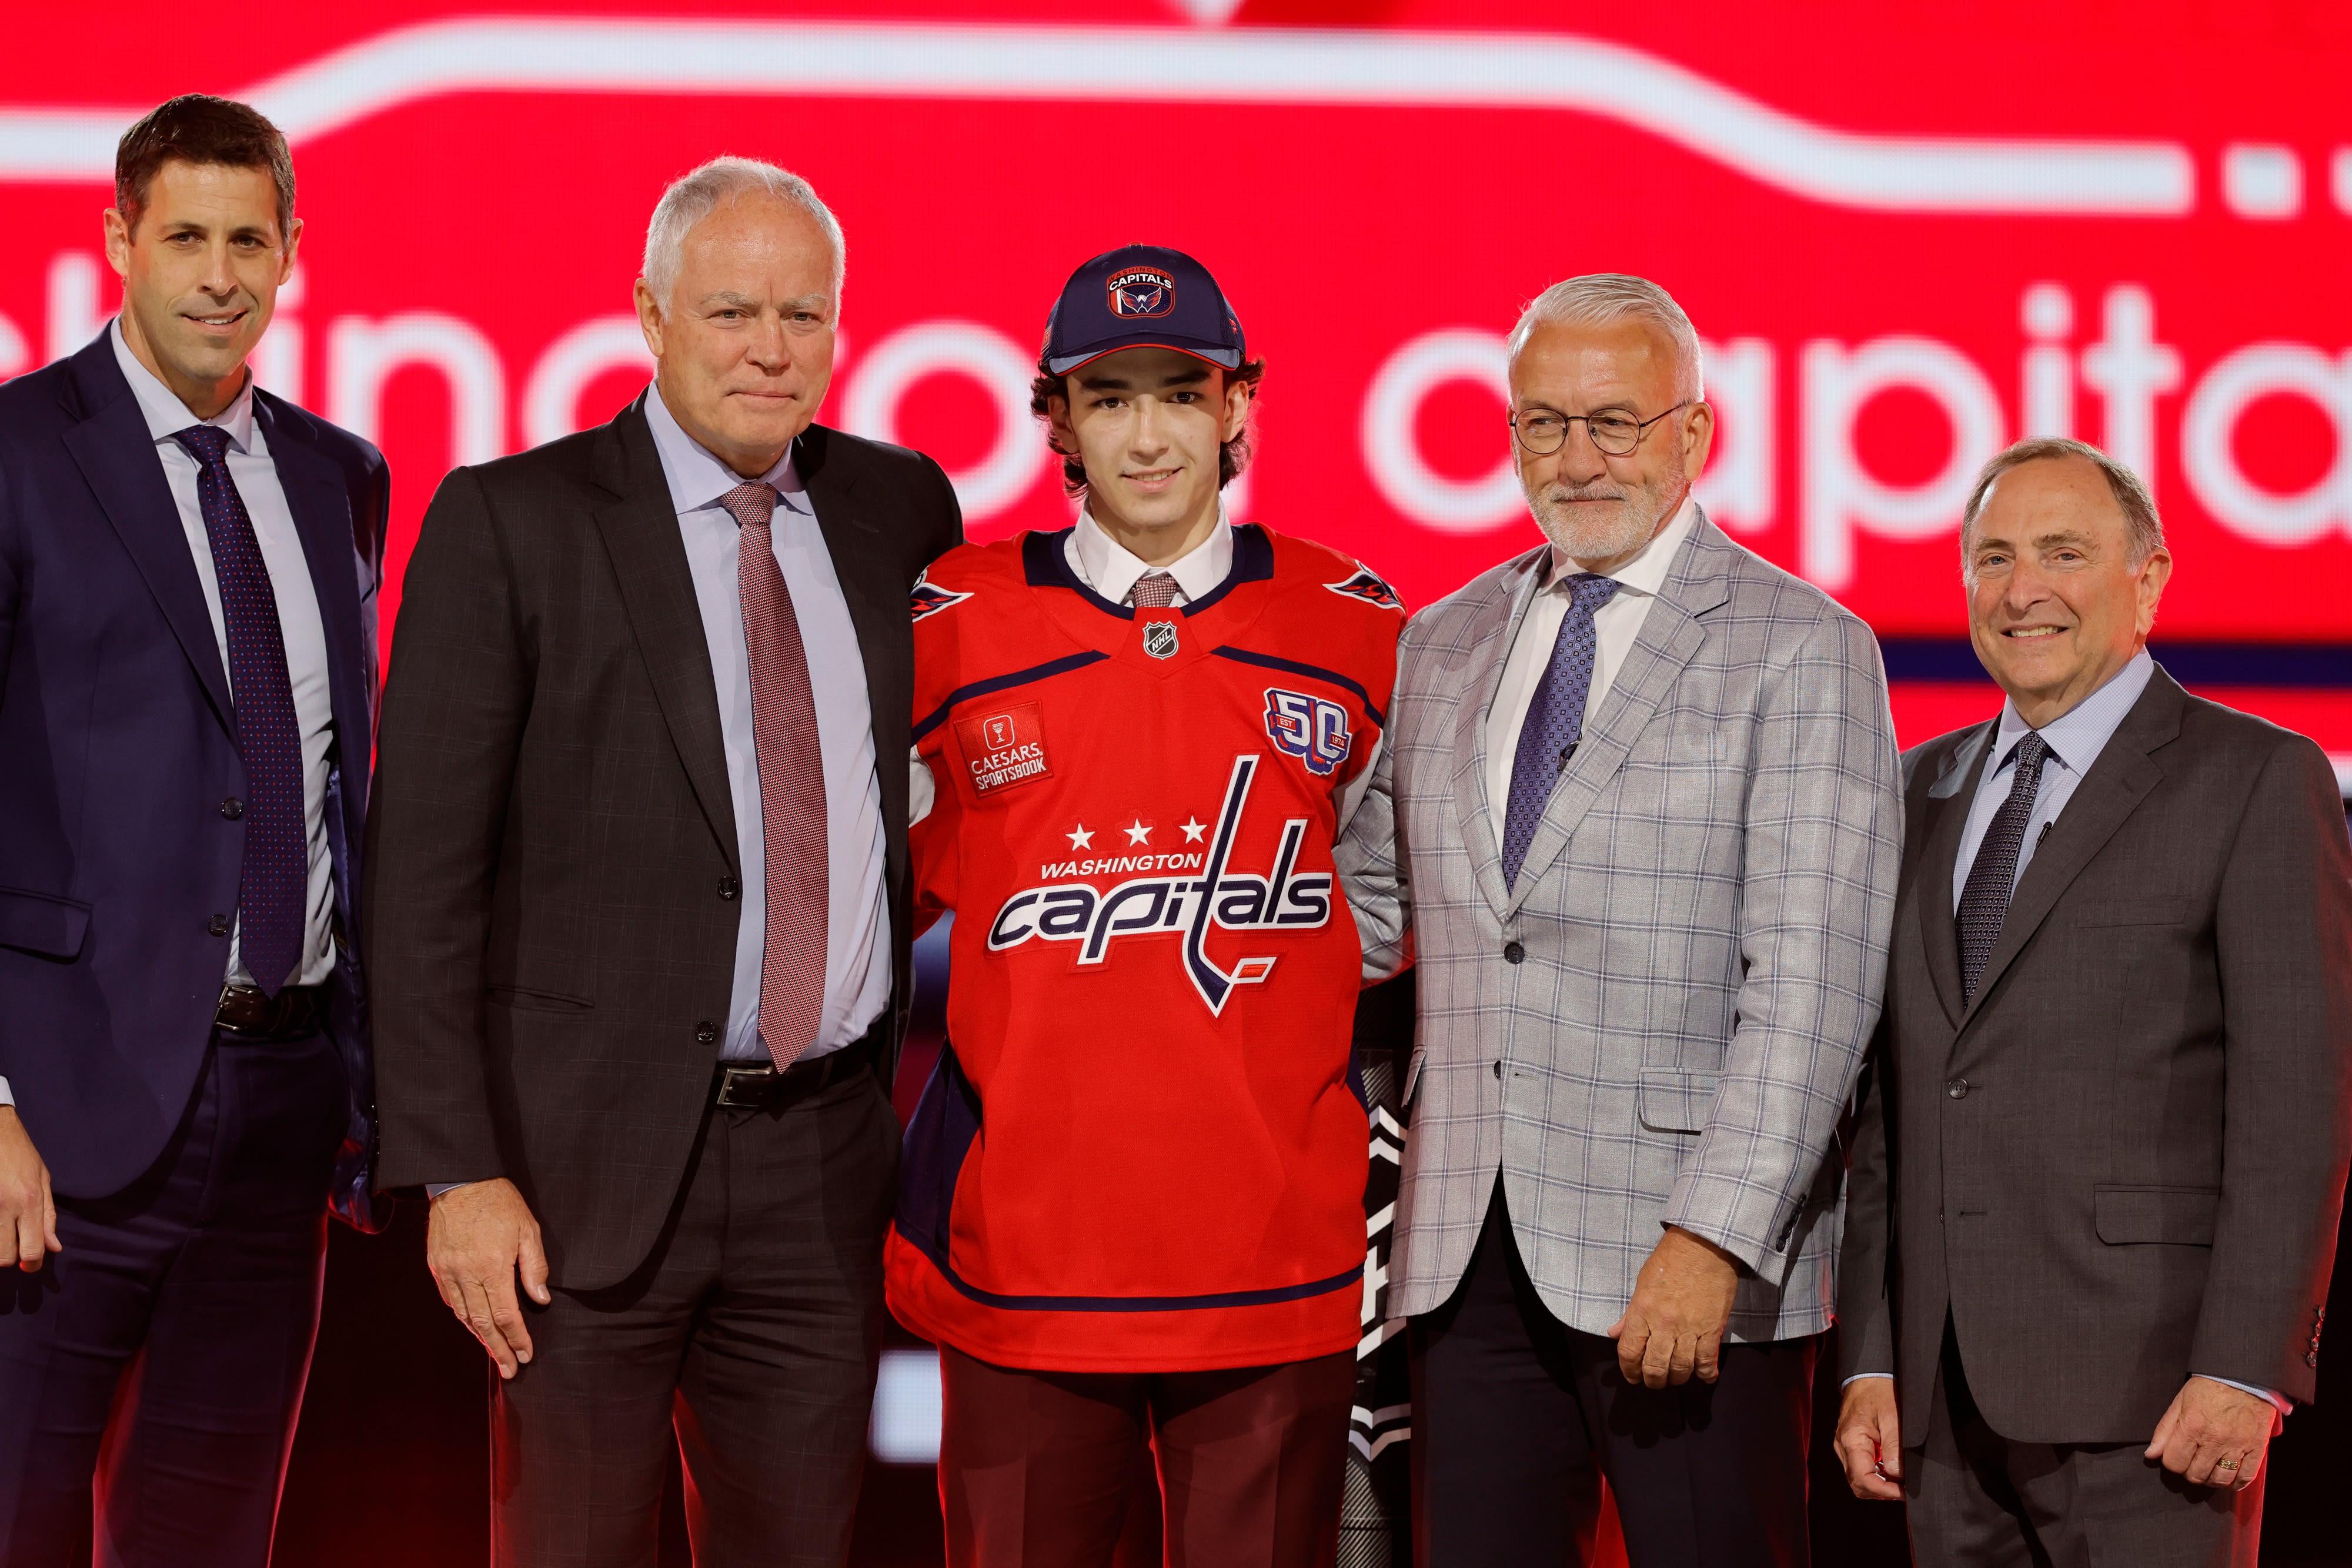 Capitals take winger Terik Parascak with 17th pick in NHL draft